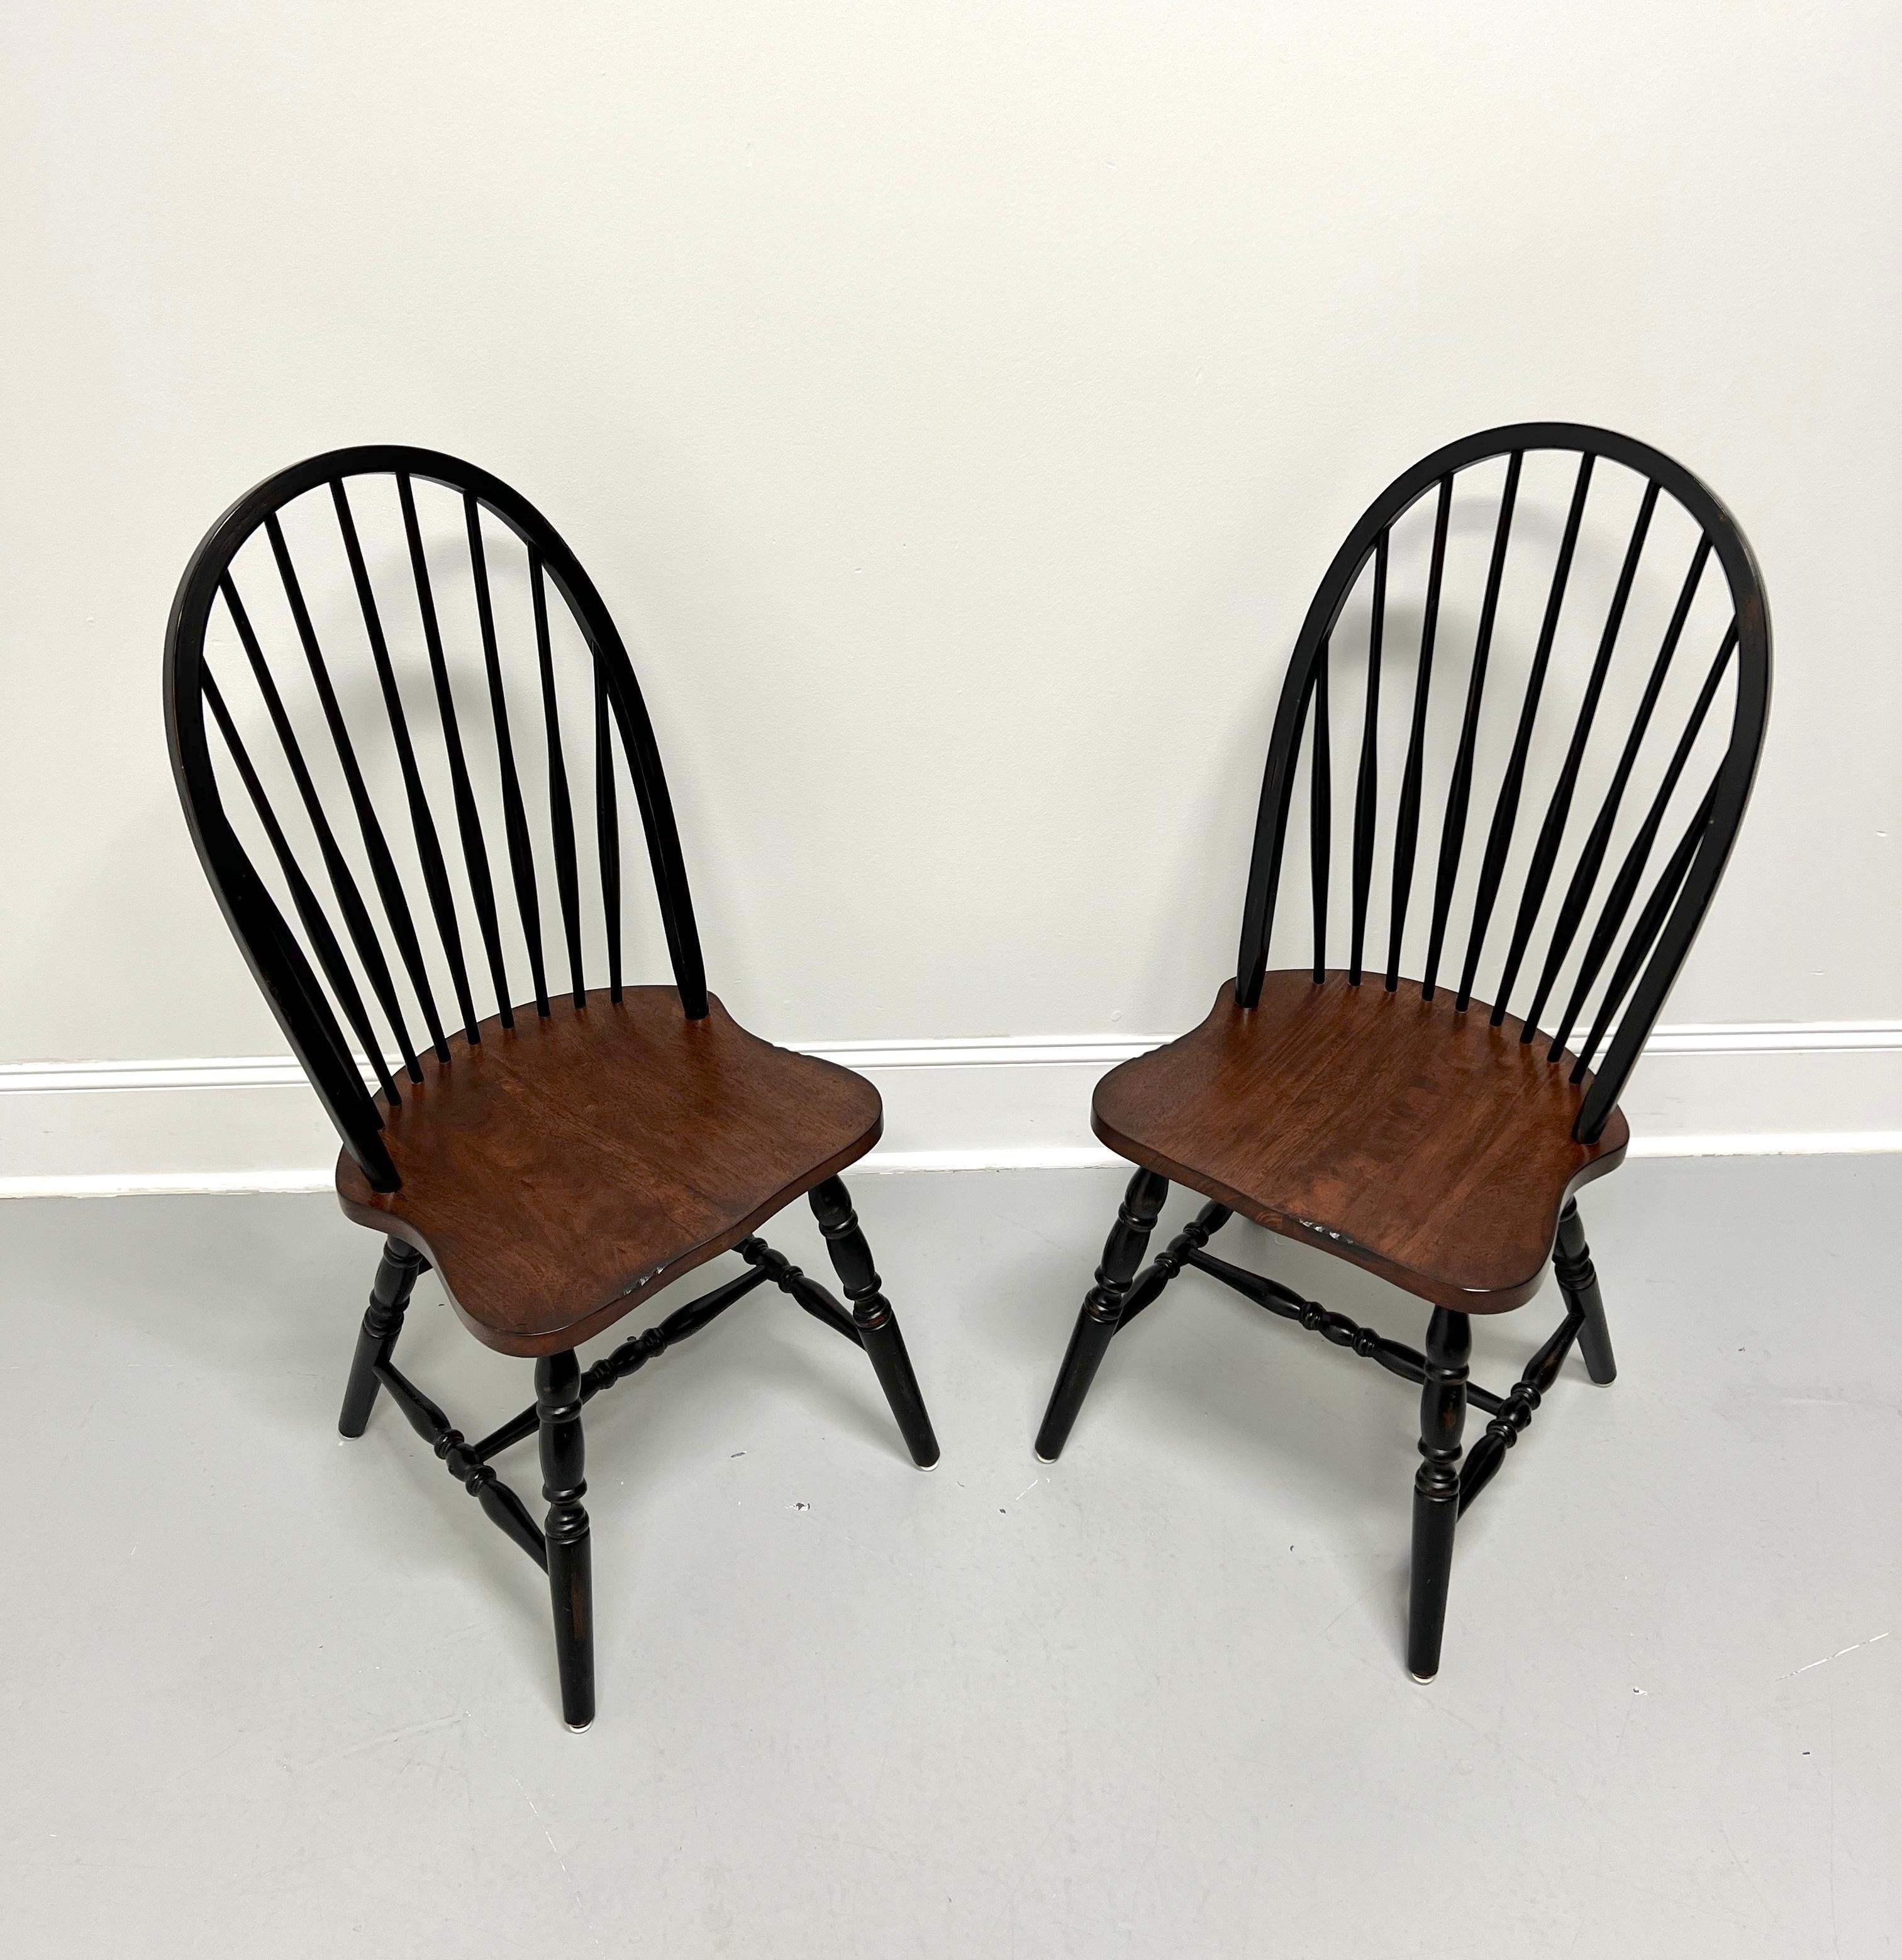 A pair of Windsor dining side chairs, unbranded. Nutwood with back, legs & stretchers painted black, bowback, tapered spindles, solid seat with a distressed stained finish, turned legs, and turned stretchers.  Made in the USA, in the late 20th